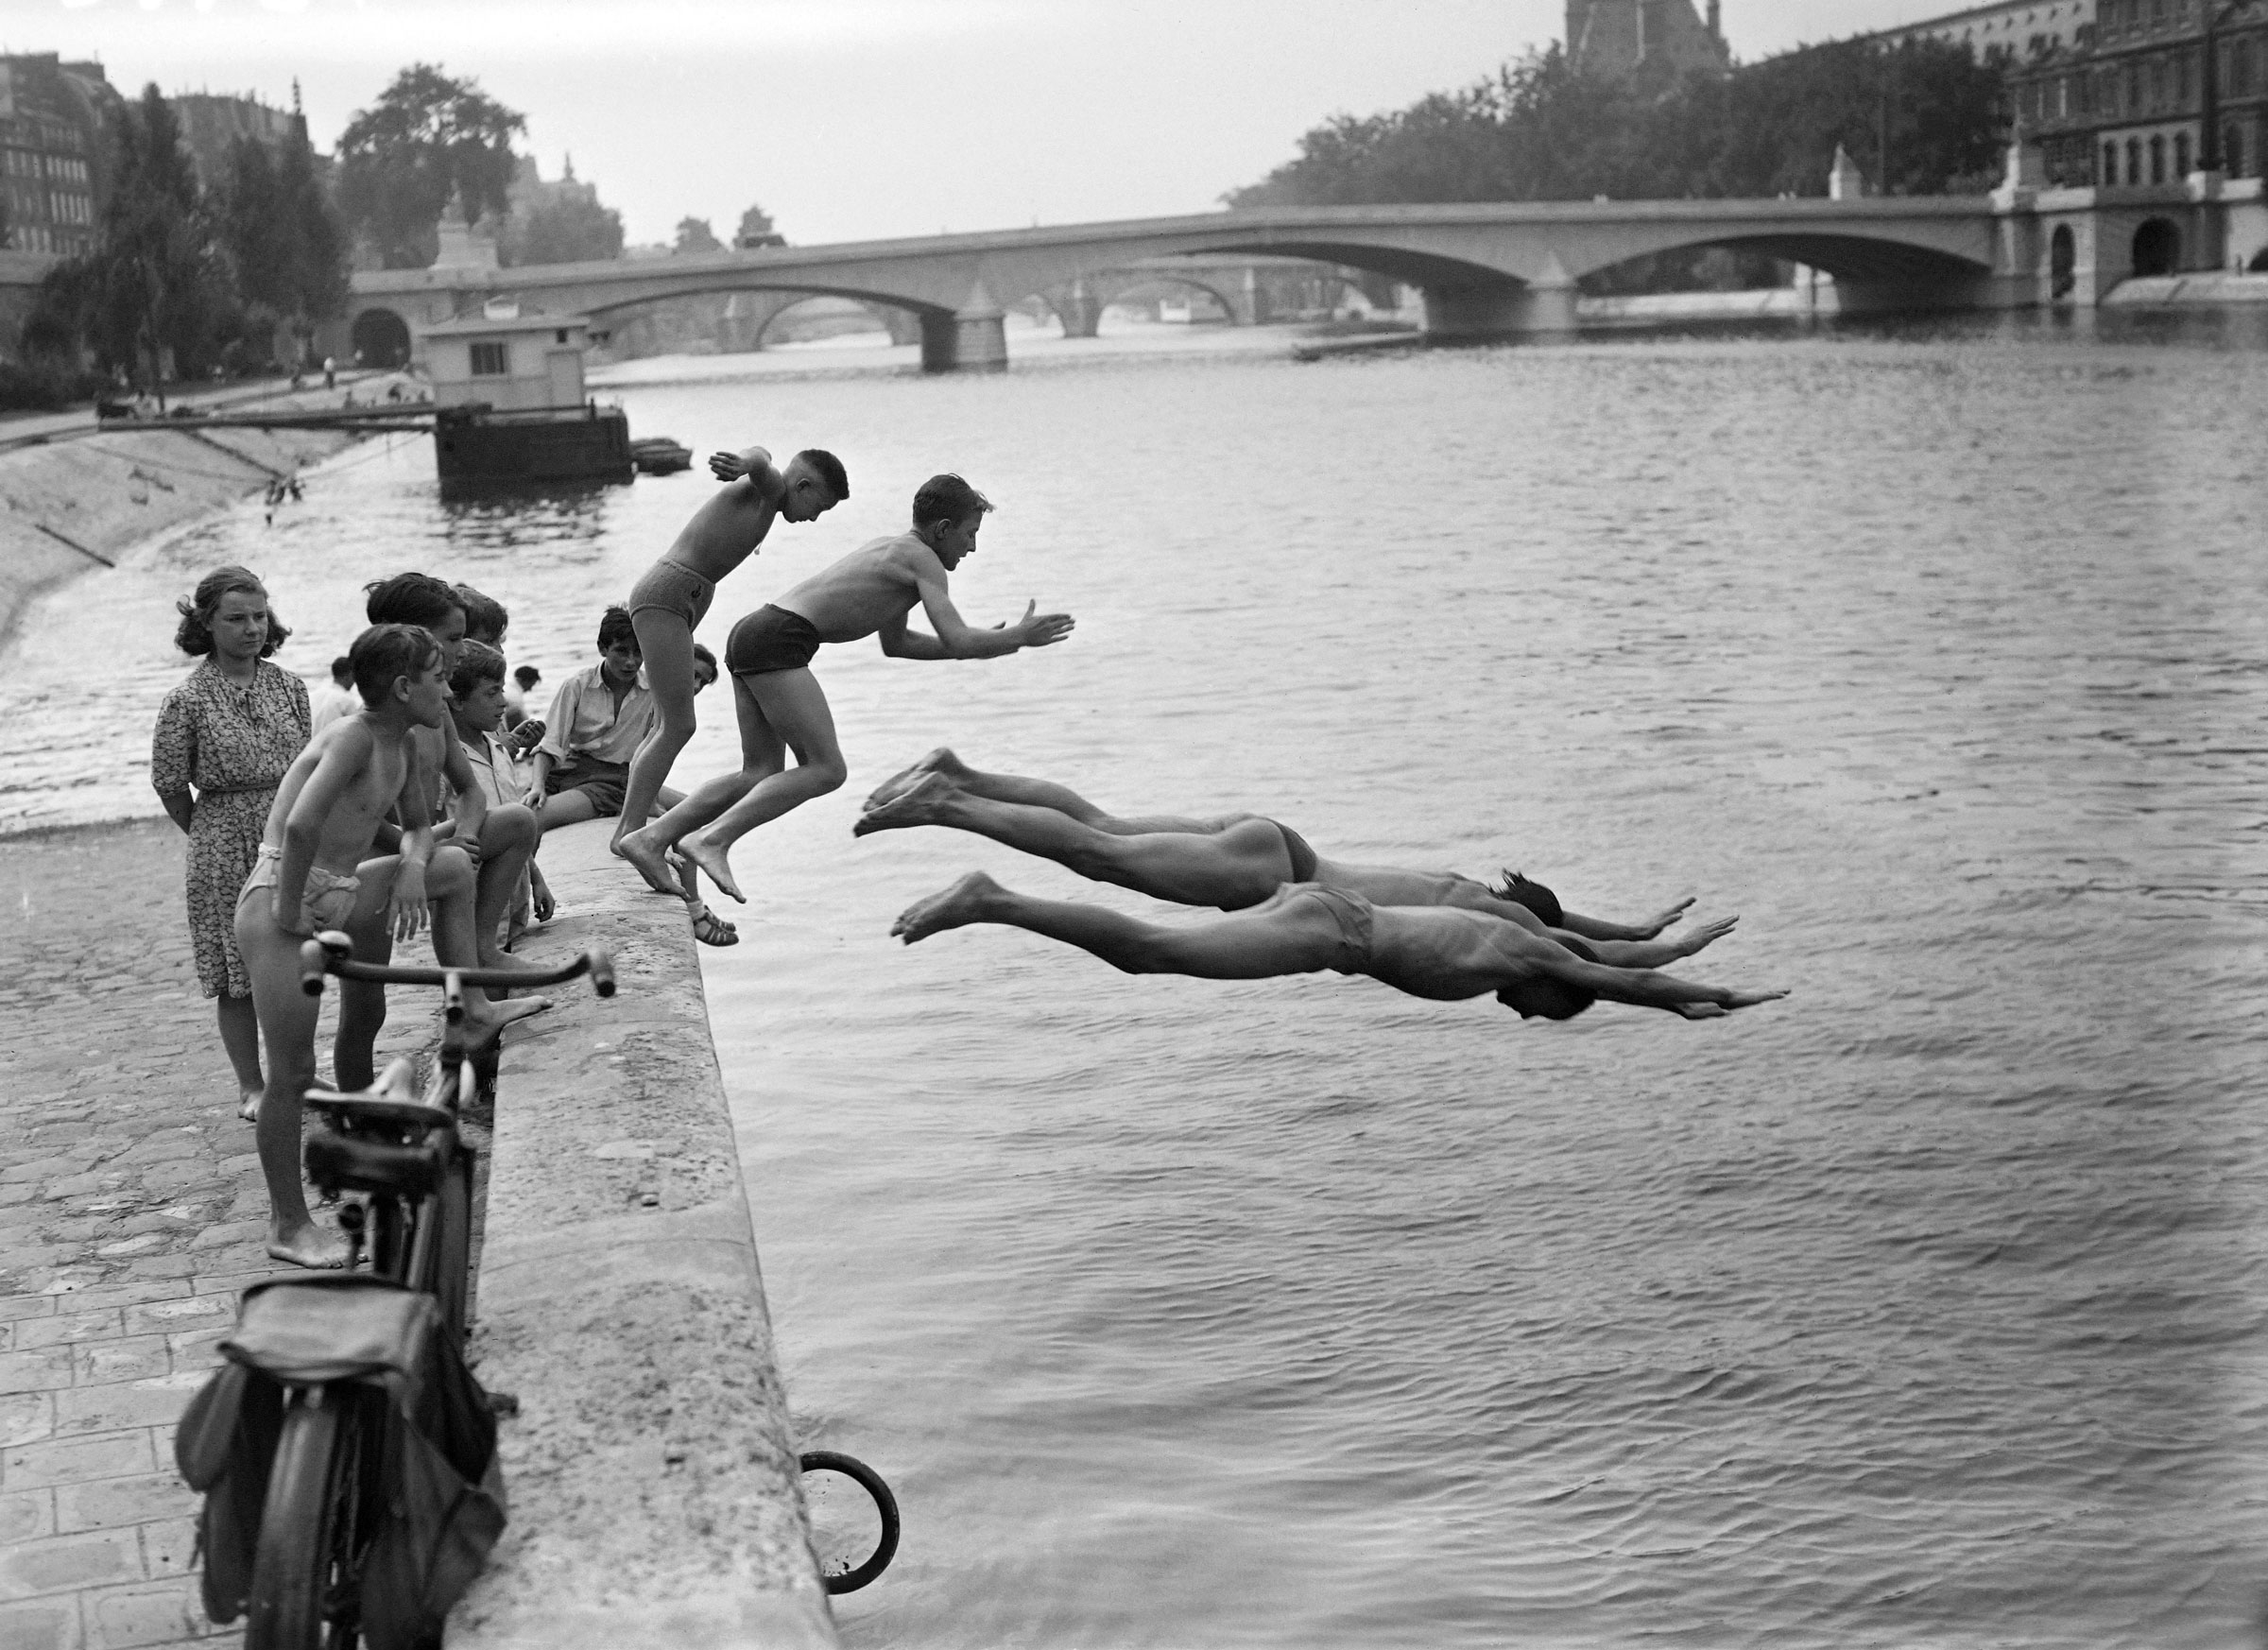 People dive into the Seine river near the Pont du Carrousel, in July 1949 in Paris, while a heat wave hits the capital. (AFP/Getty Images)